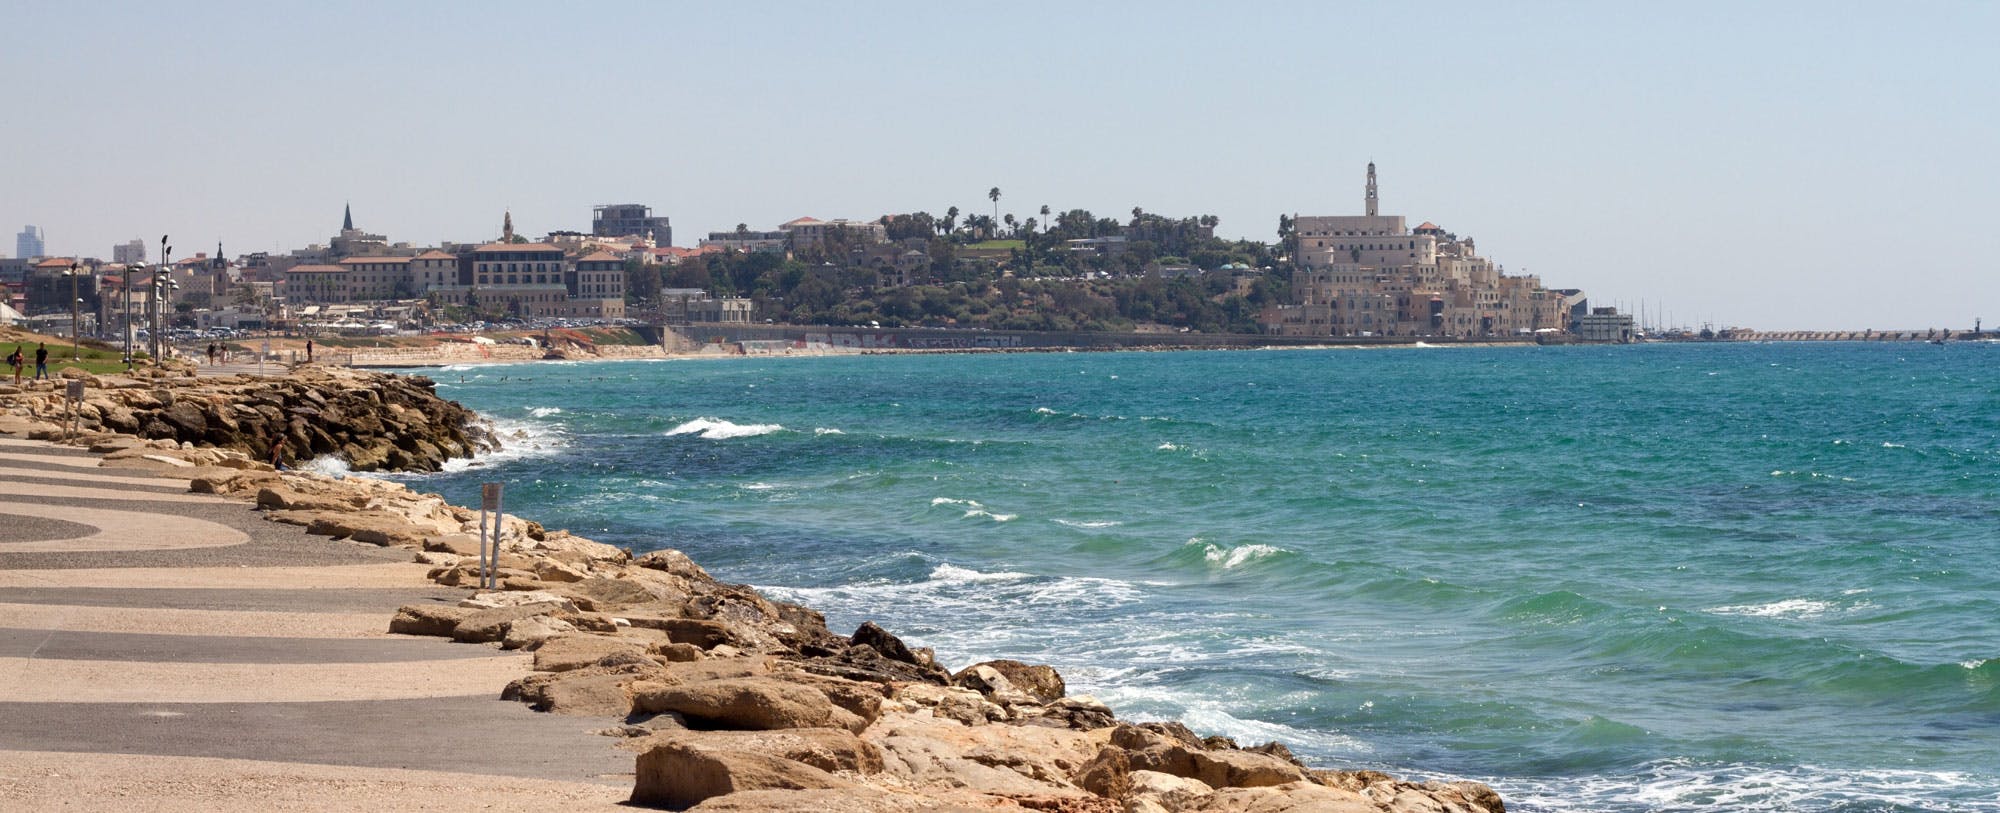 Travel Tips and Adventures in Israel